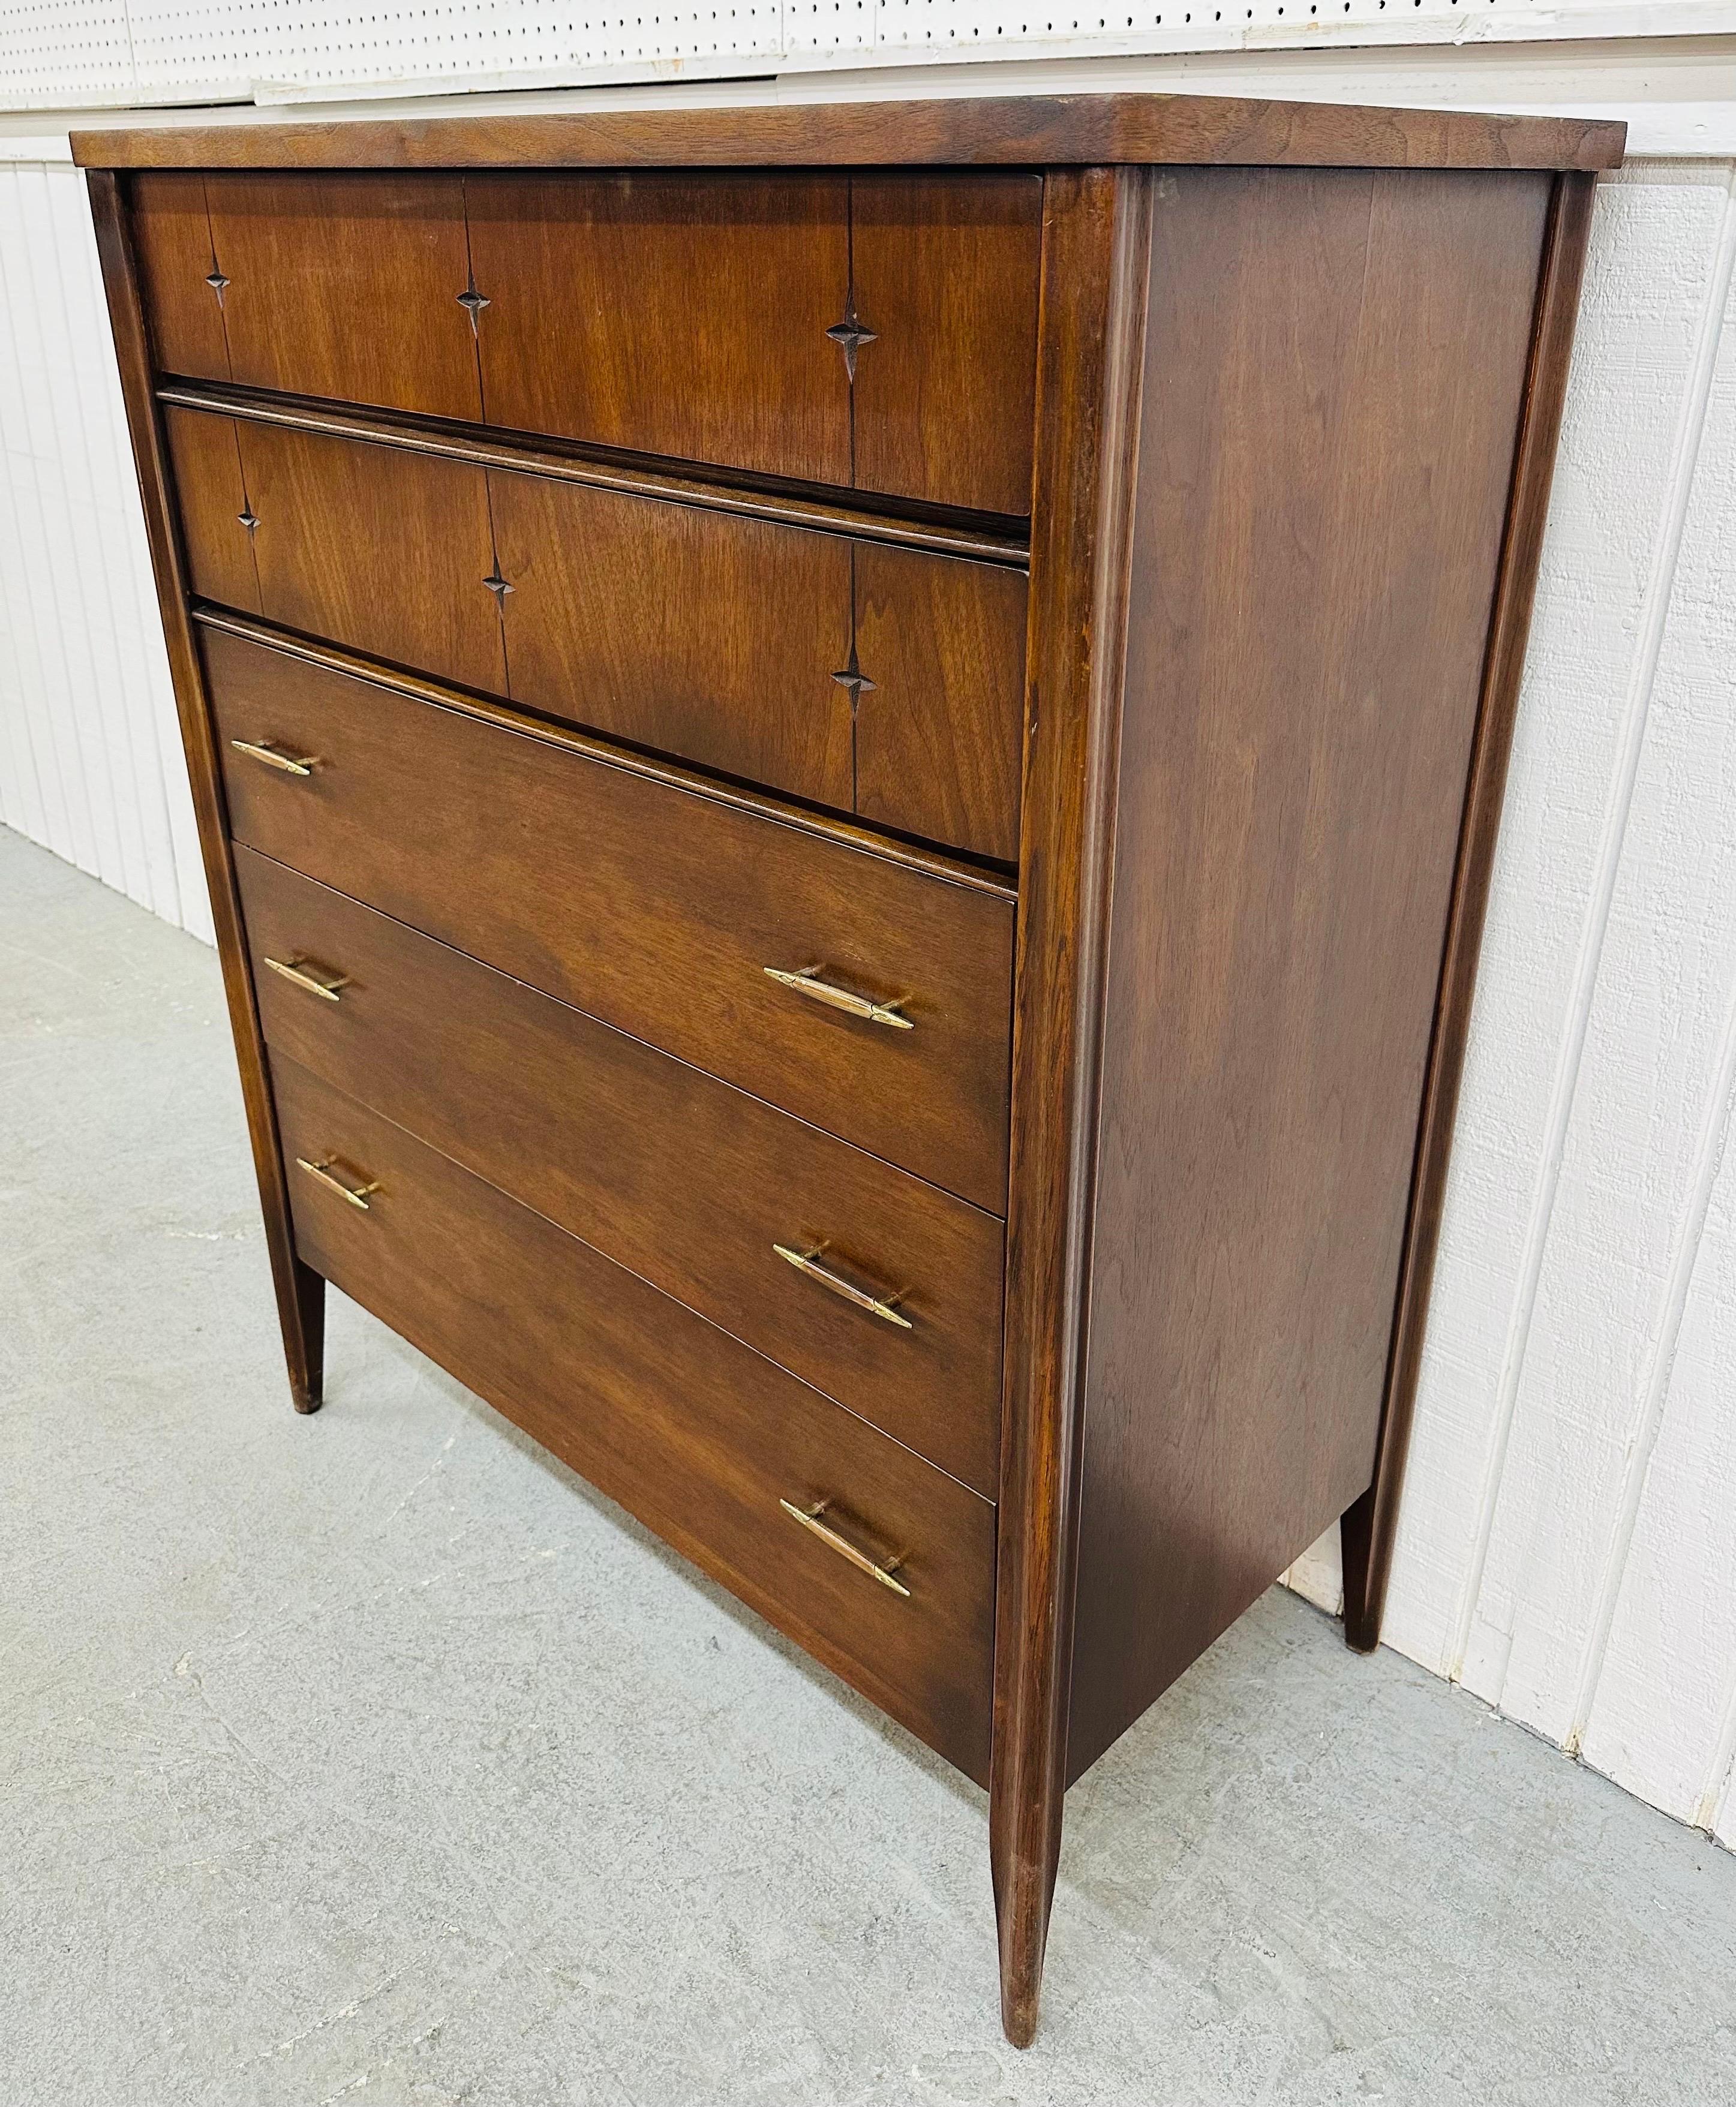 This listing is for a Mid-Century Modern Broyhill Saga Walnut High Chest. Featuring a straight line design, two top drawers with the iconic Saga stars carved in, three larger bottom drawers with the original hardware, and a beautiful walnut finish!